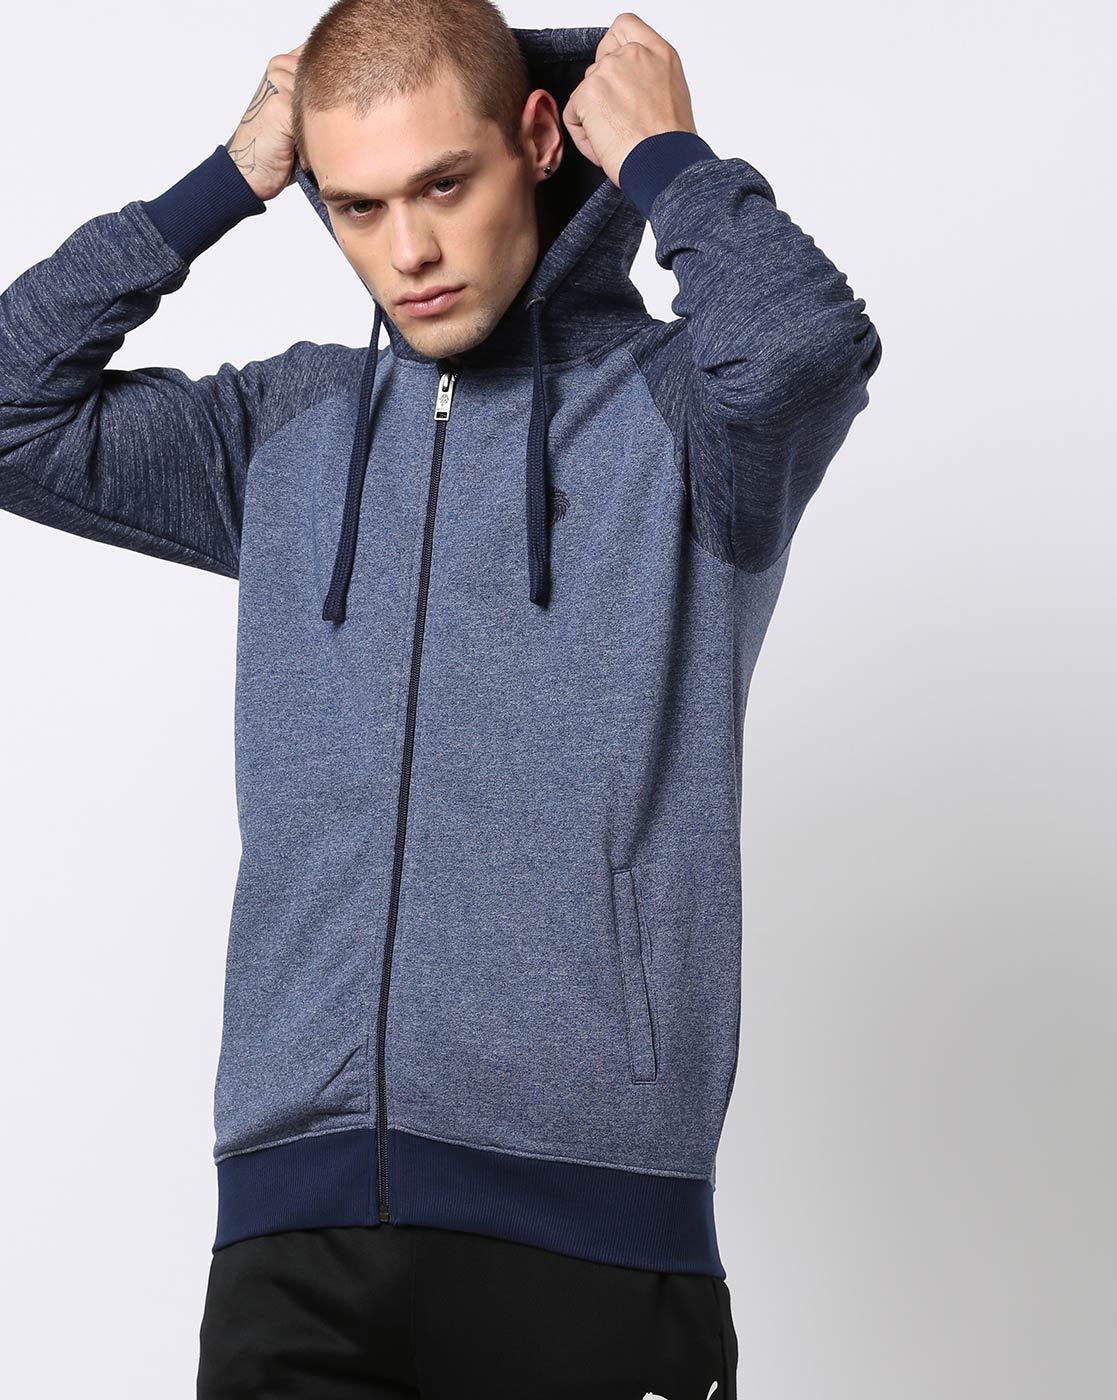 navy blue hooded sweater